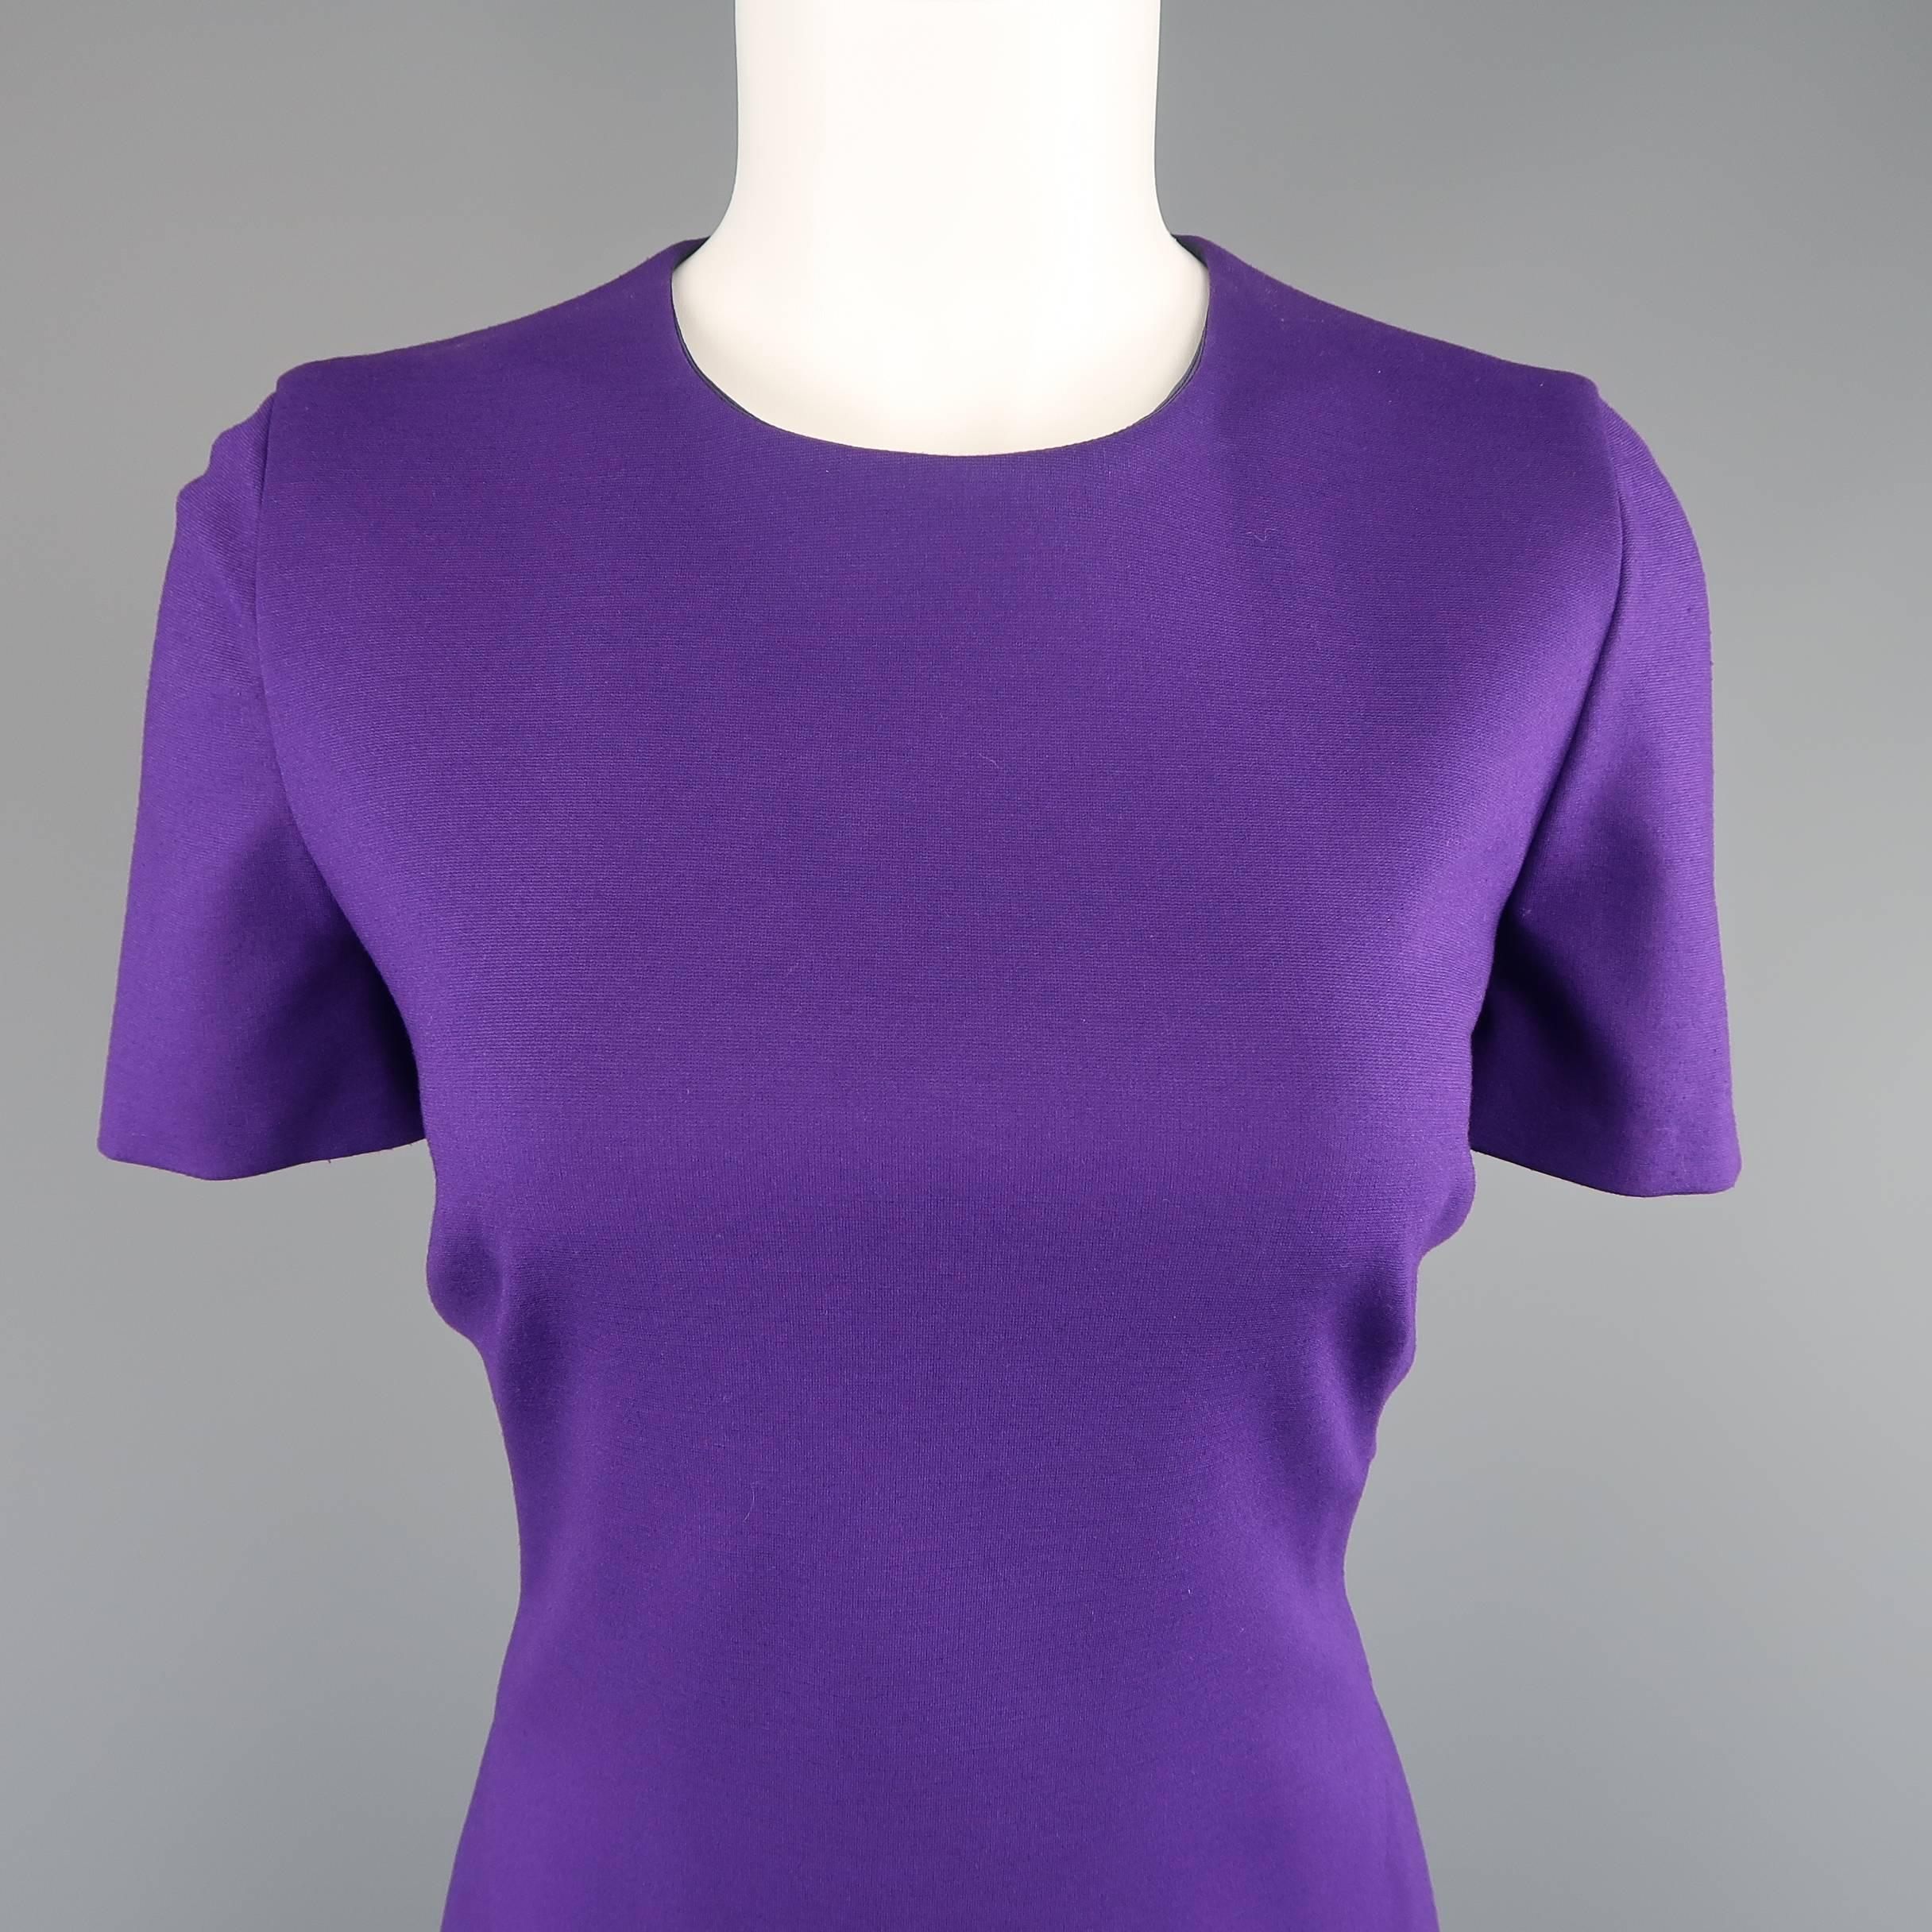 AKRIS dress comes in a purple jersey knit with a round neckline, short sleeves and fitted flair A line silhouette.
 
New with Tags.
Marked: 8
 
Measurements:
 
Shoulder: 14 in.
Bust: 36 in.
Waist: 31 in.
Hip: 36 in.
Sleeve: 8 in.
Length: 40 in.
